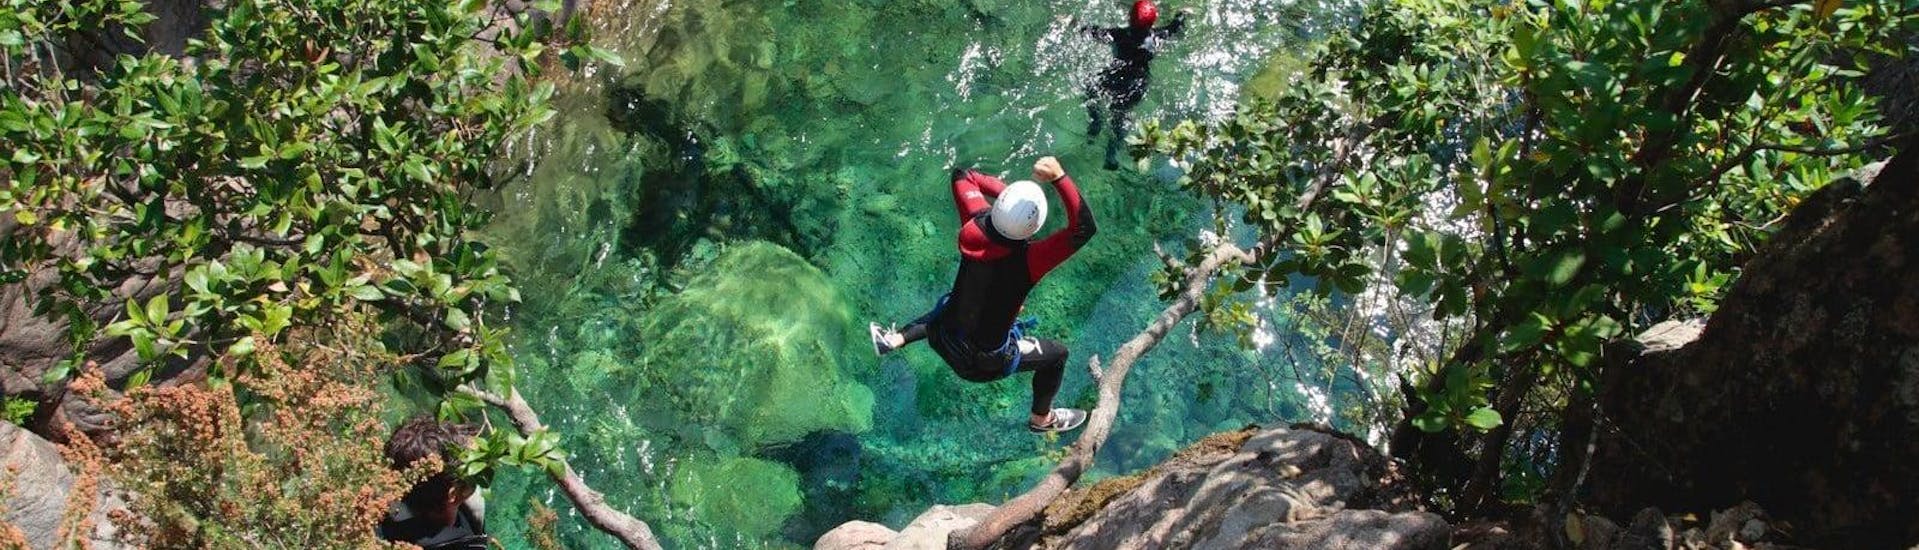 A participant of Canyoning "Discovery" - Canyon de Pulischellu is jumping into an emerald green natural pool under the supervision of a qualified canyoning guide from Acqua et Natura.